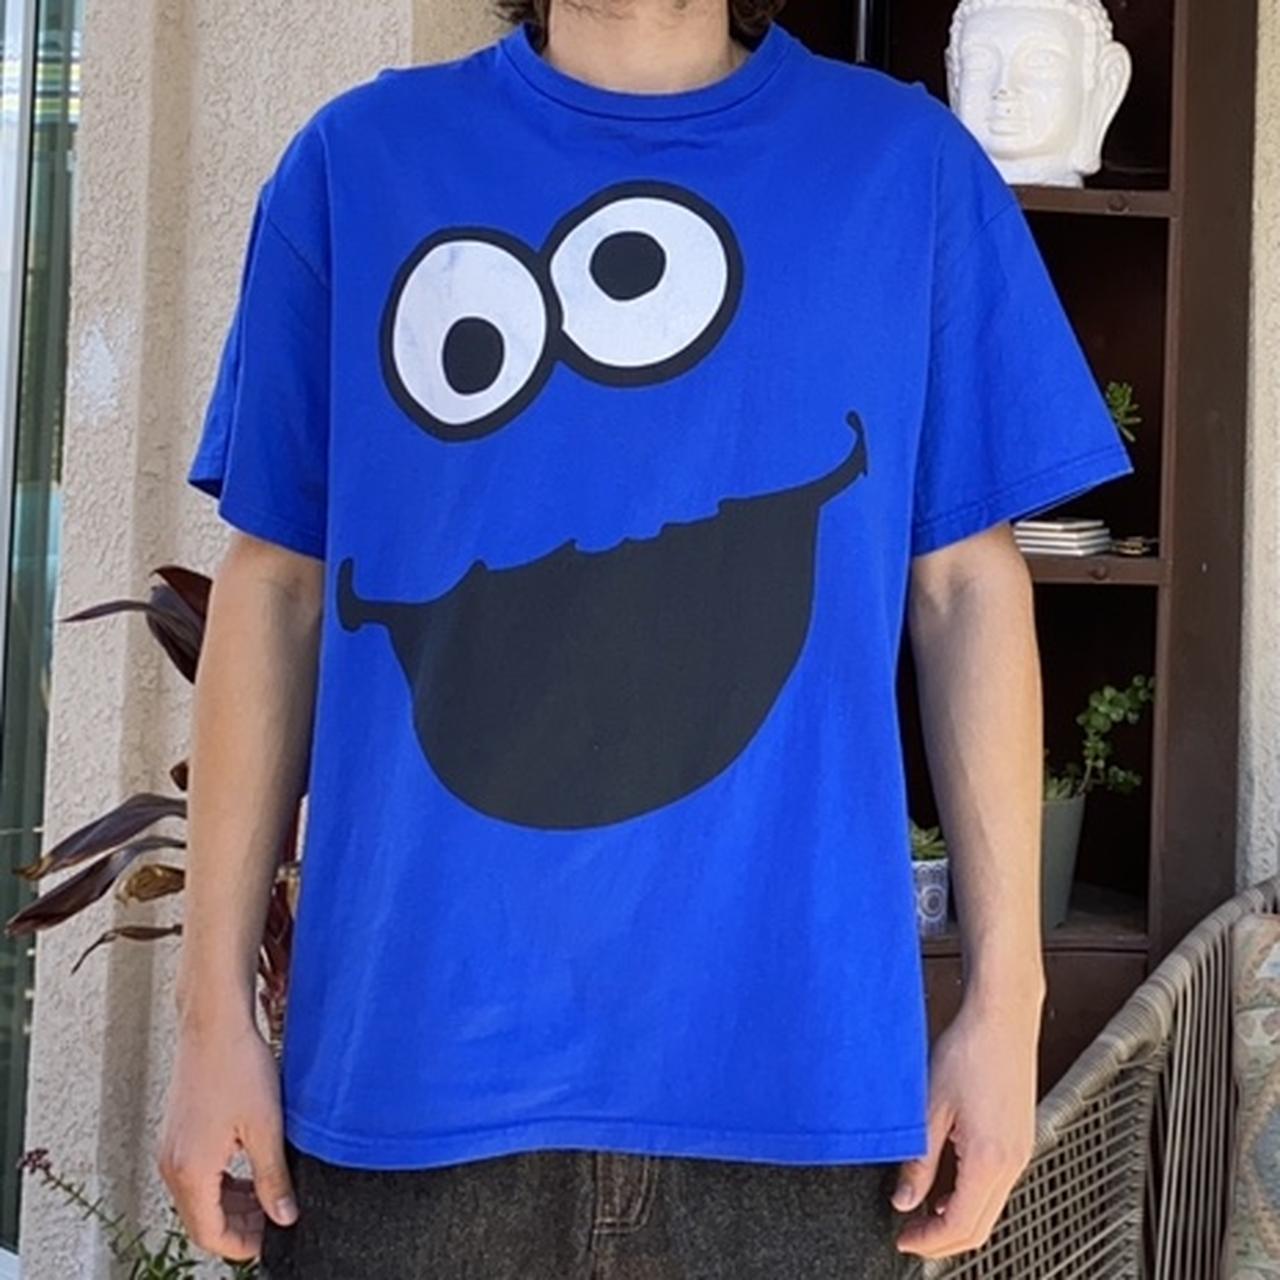 Retro Cookie Monster Tee, FREE SHIPPING, OFFICIAL